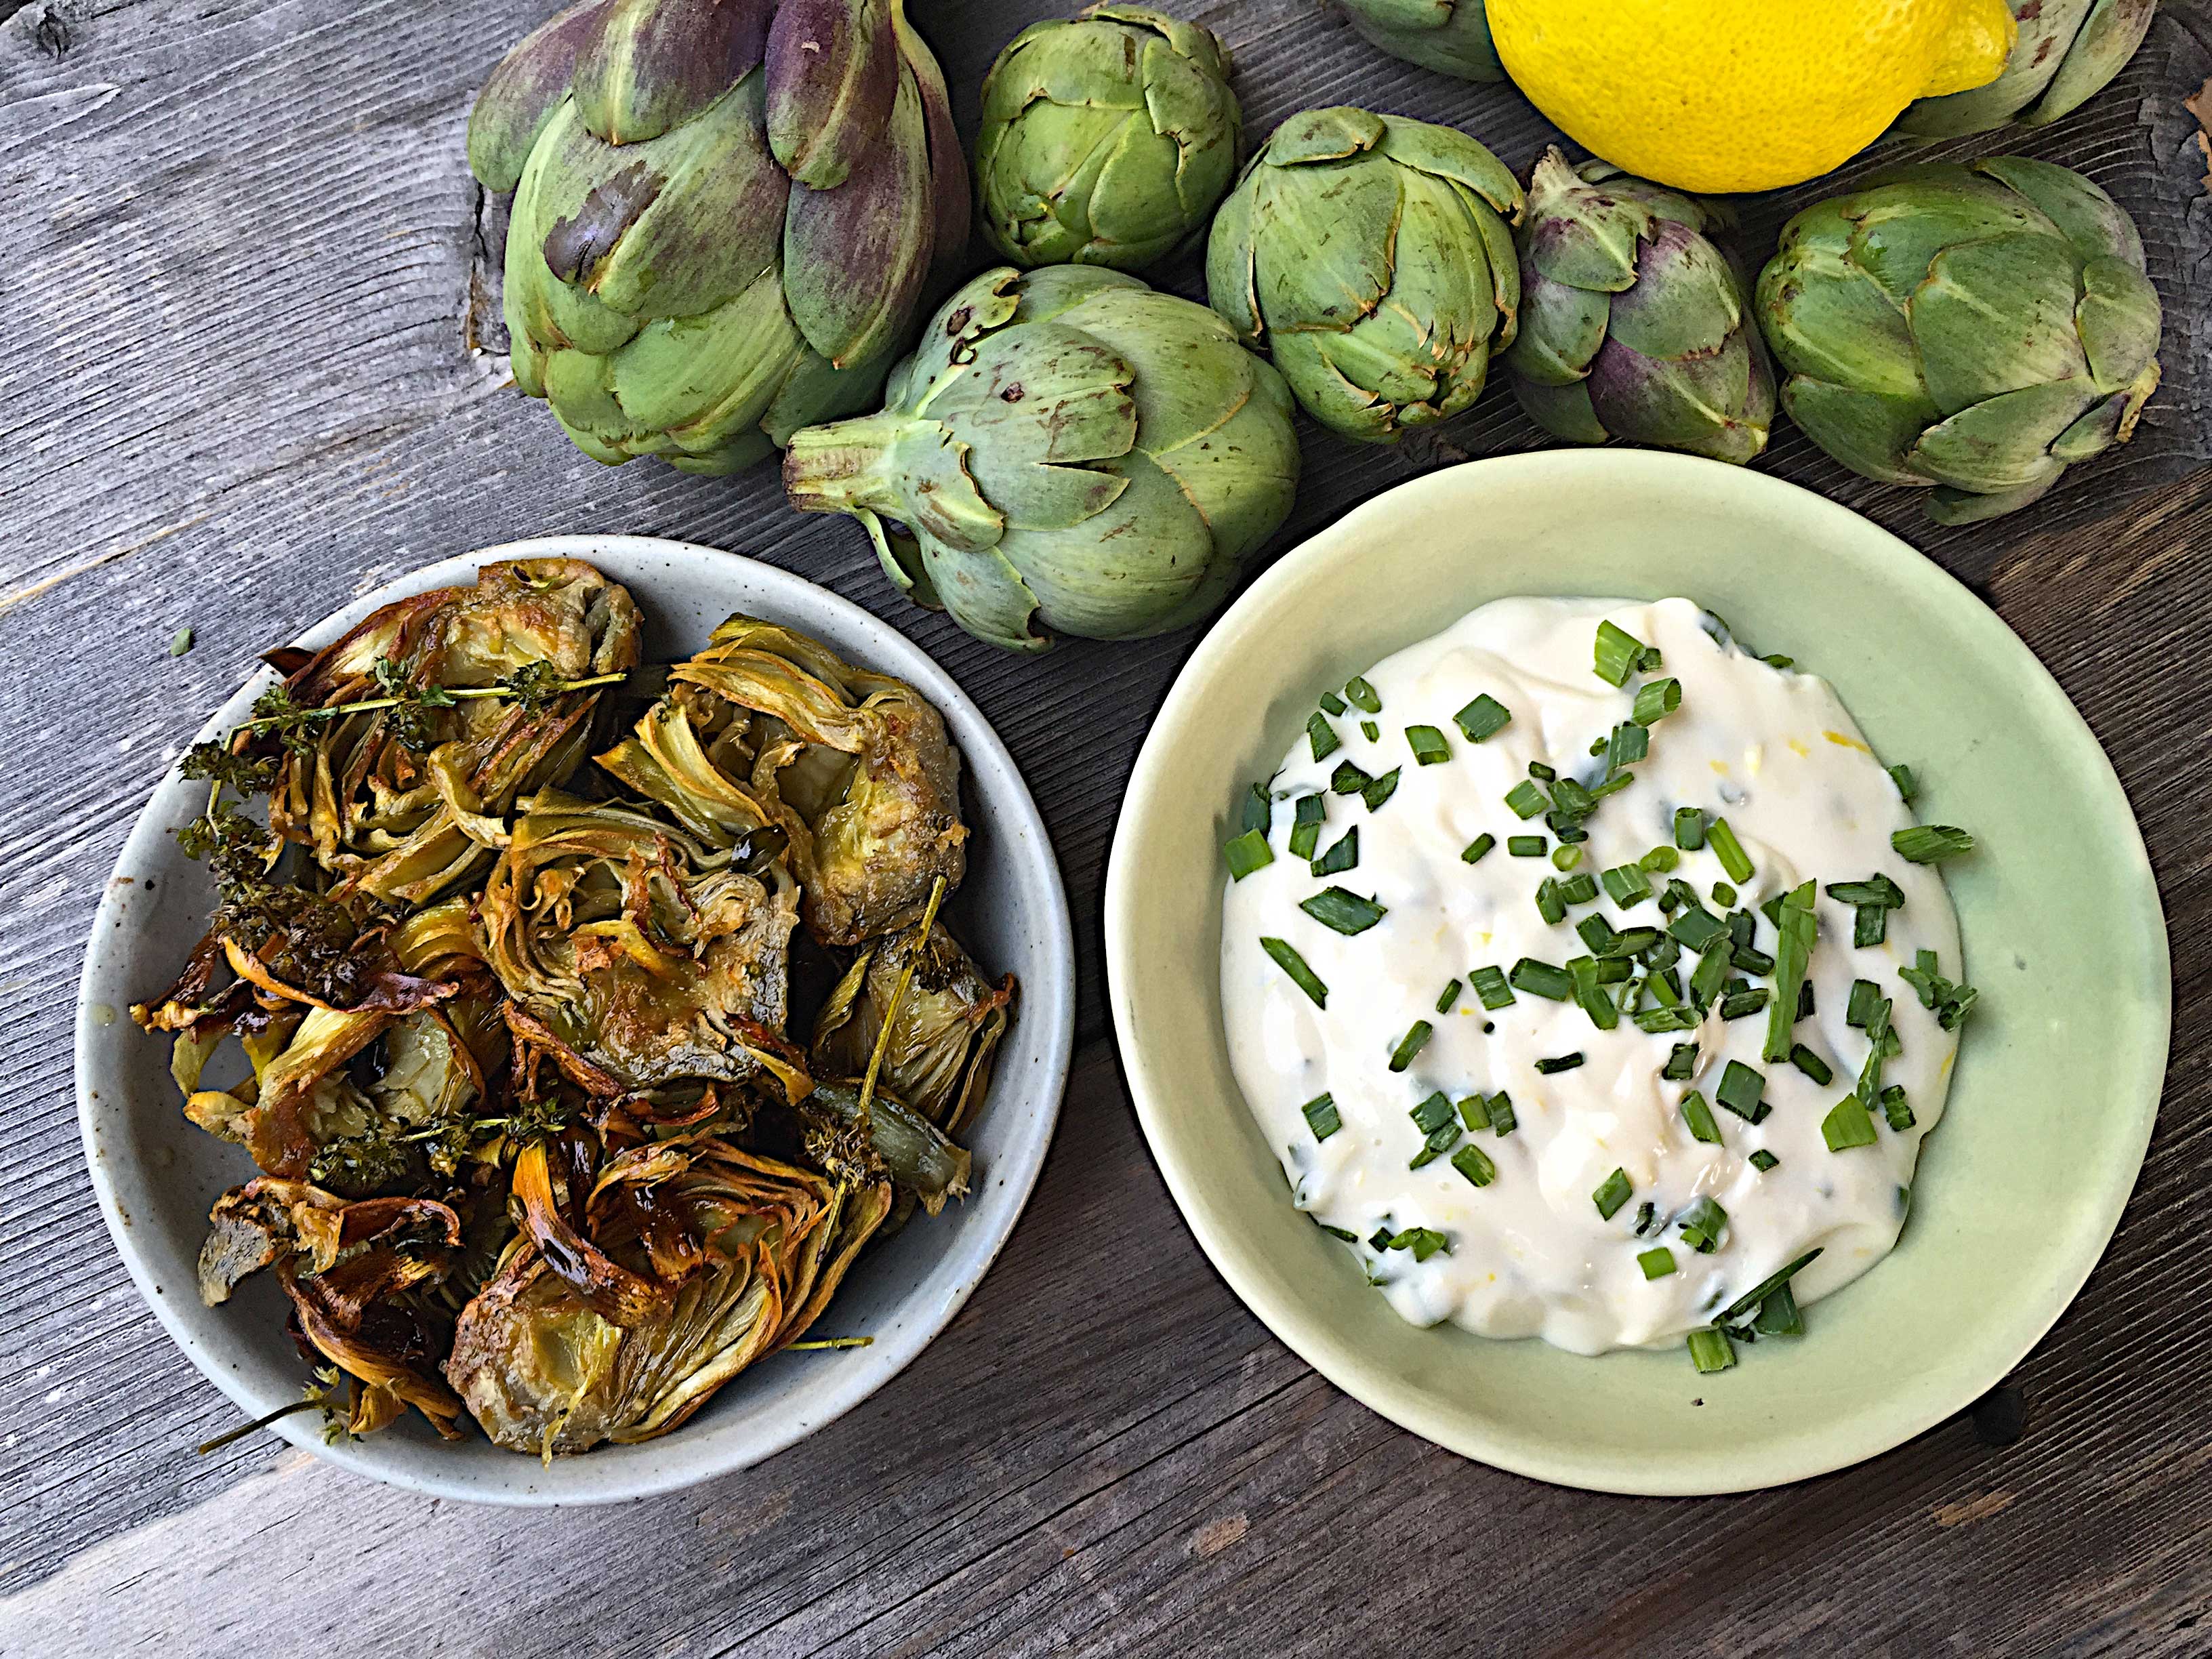 Steam fried baby artichokes with lemon-chive aioli | Olive ...